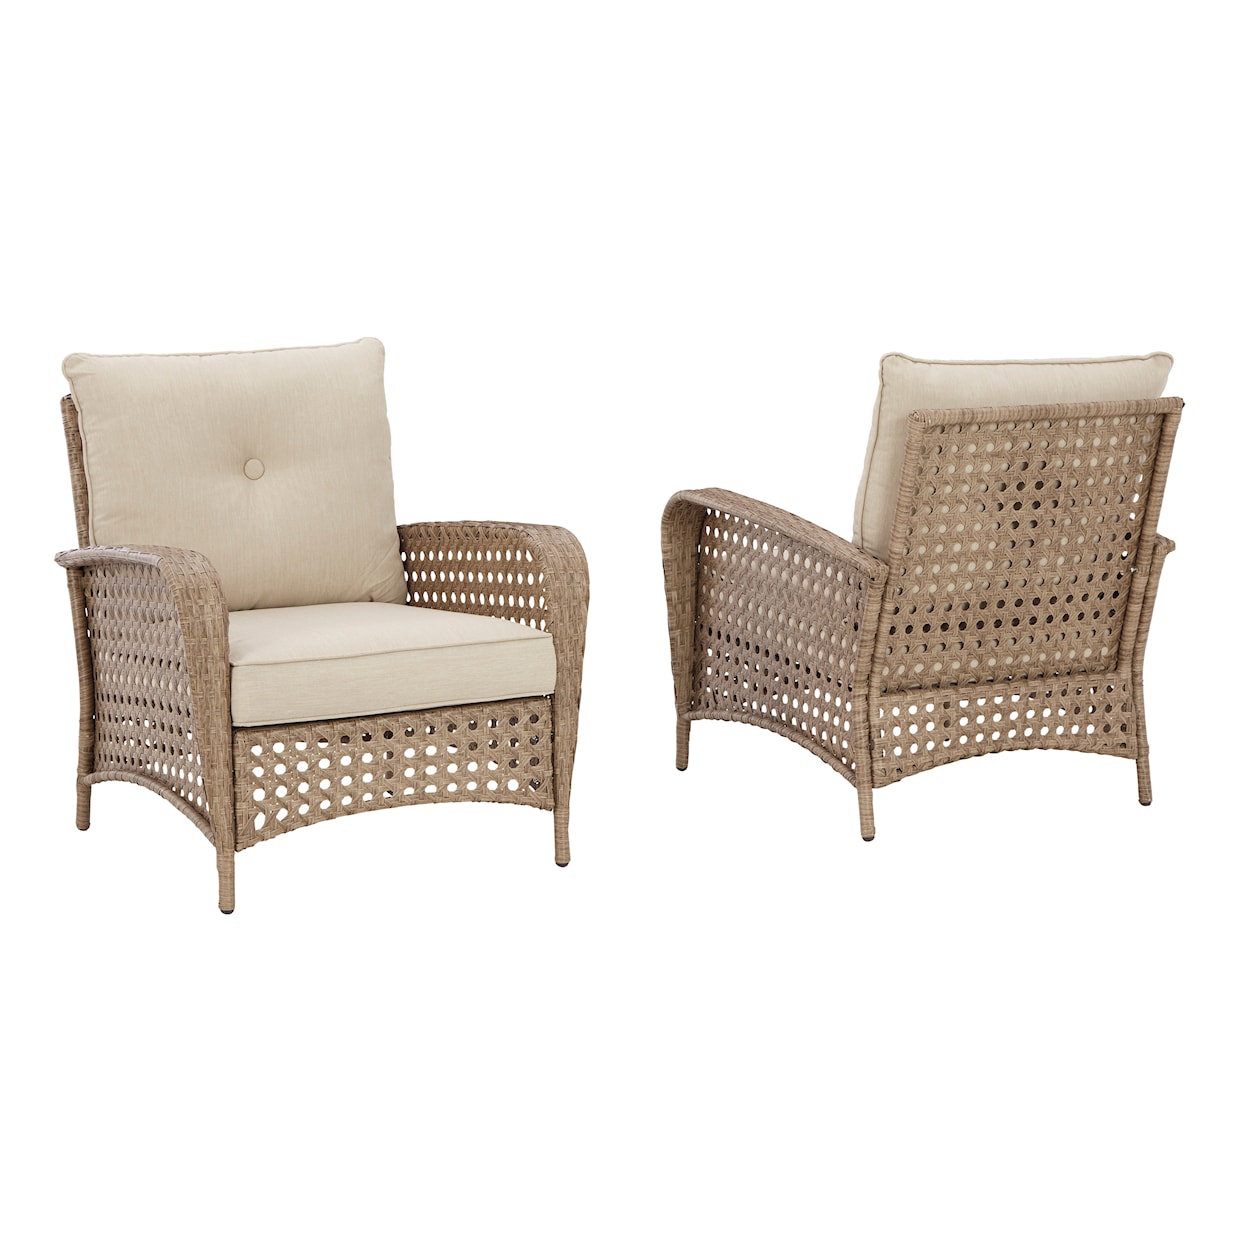 Signature Design by Ashley Braylee Set of 2 Lounge Chairs with Cushion